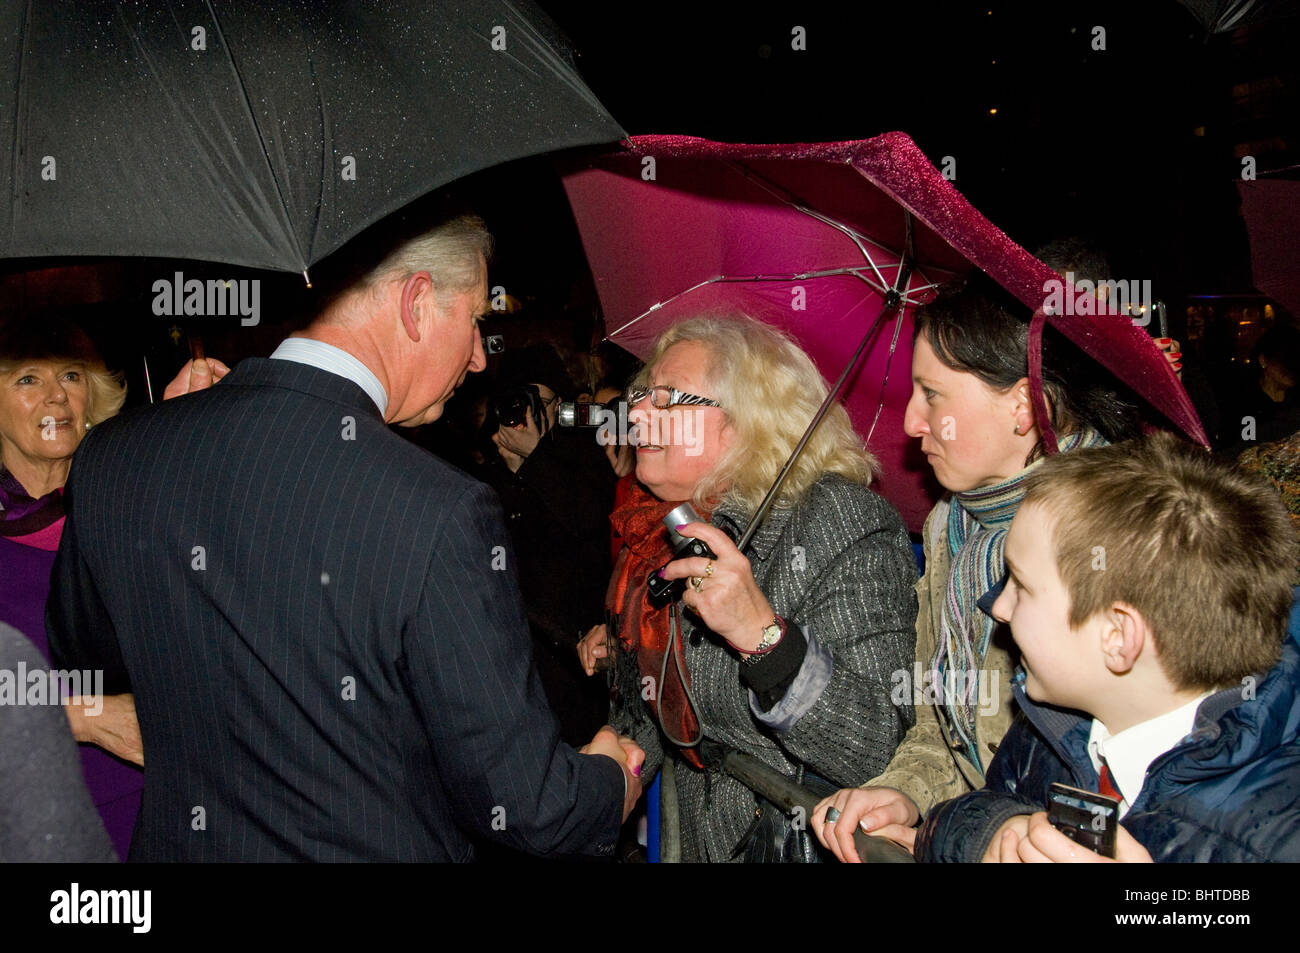 HRH Prince of Wales and Duches of York Visit, POSK, Hammersmith, London, United Kingdom, 24.02.2010 Stock Photo